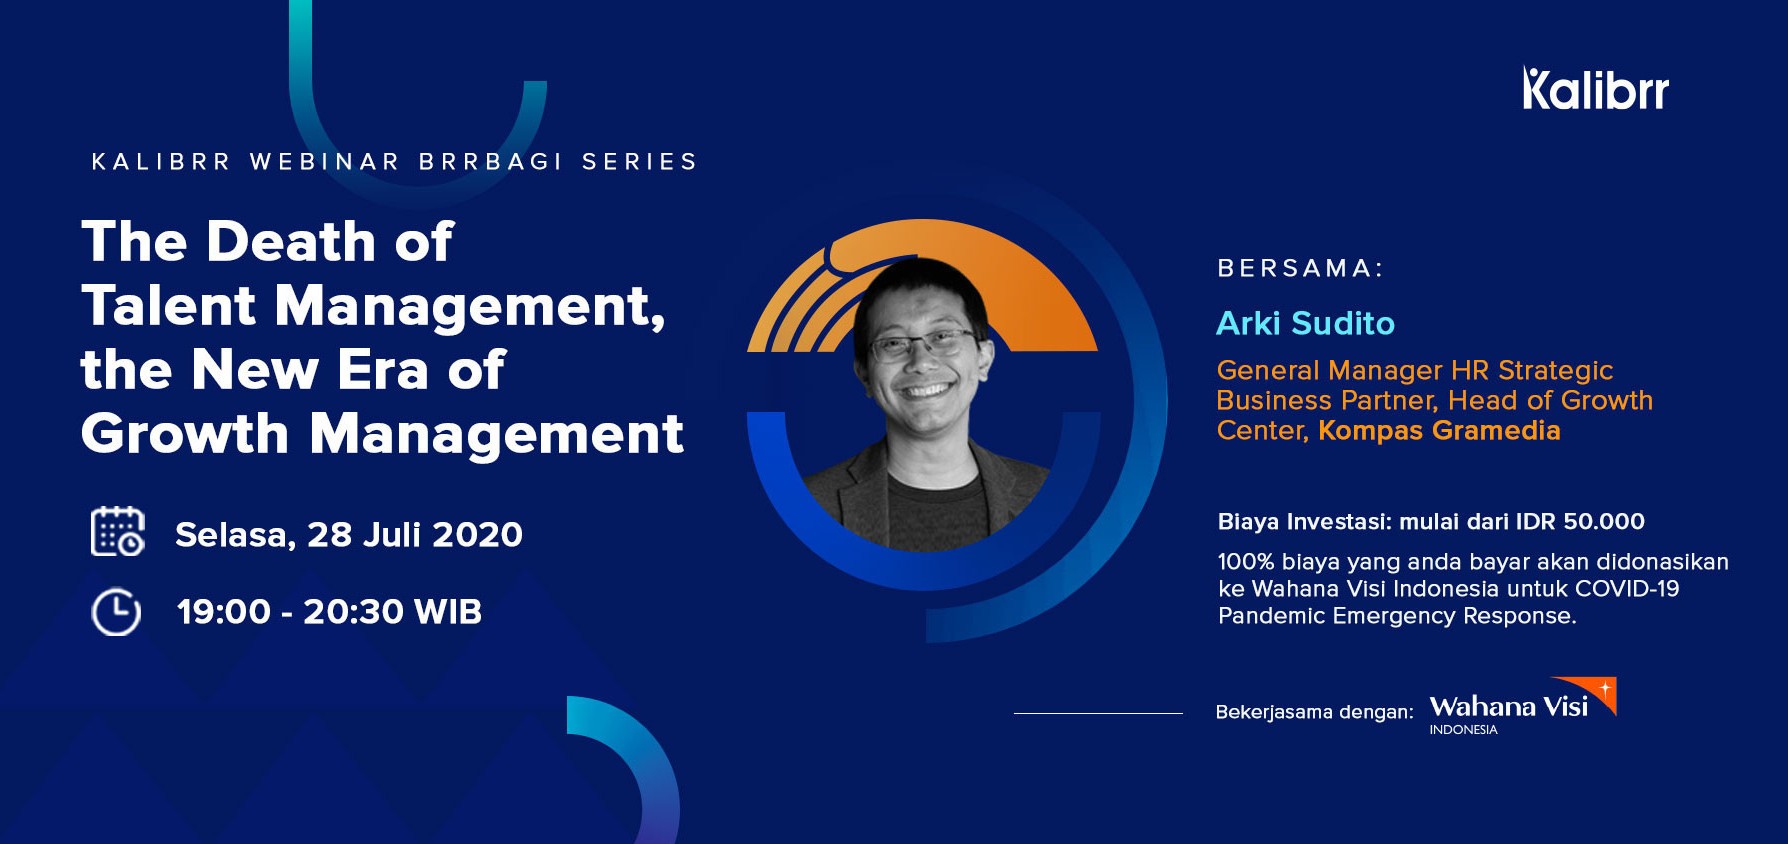 Kalibrr Webinar Brrbagi Series - The Death of Talent Management, The New Era of Growth Management